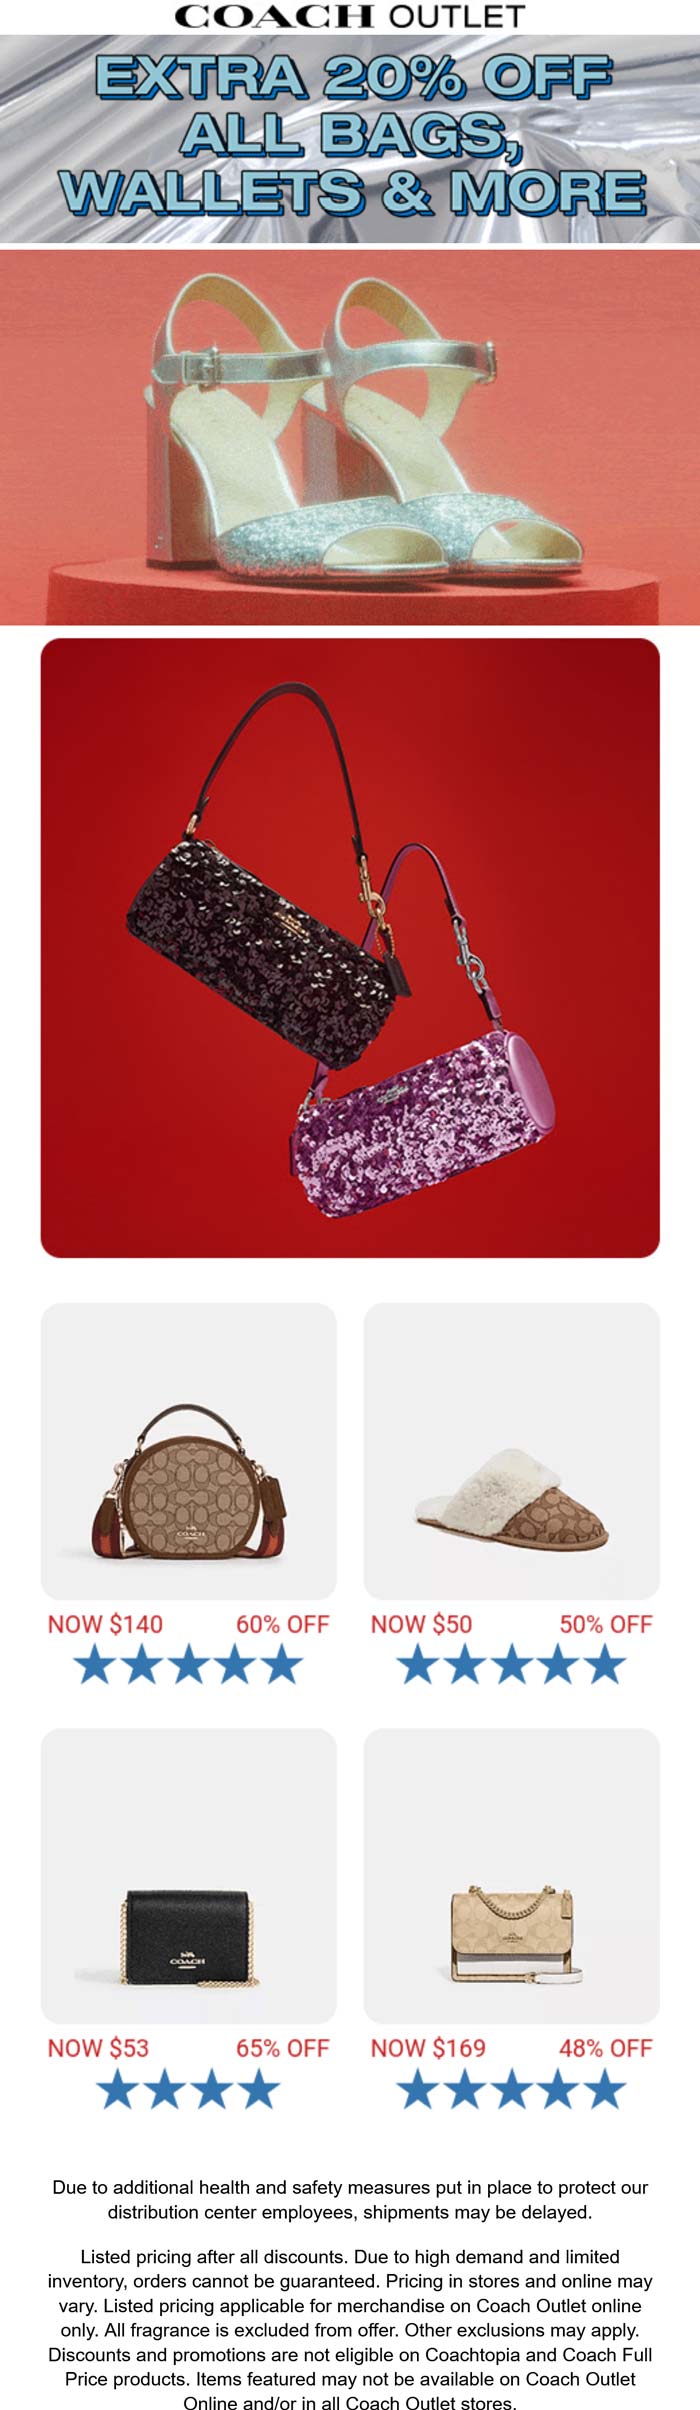 Coach Outlet stores Coupon  Extra 20% off all bags & wallets at Coach Outlet #coachoutlet 